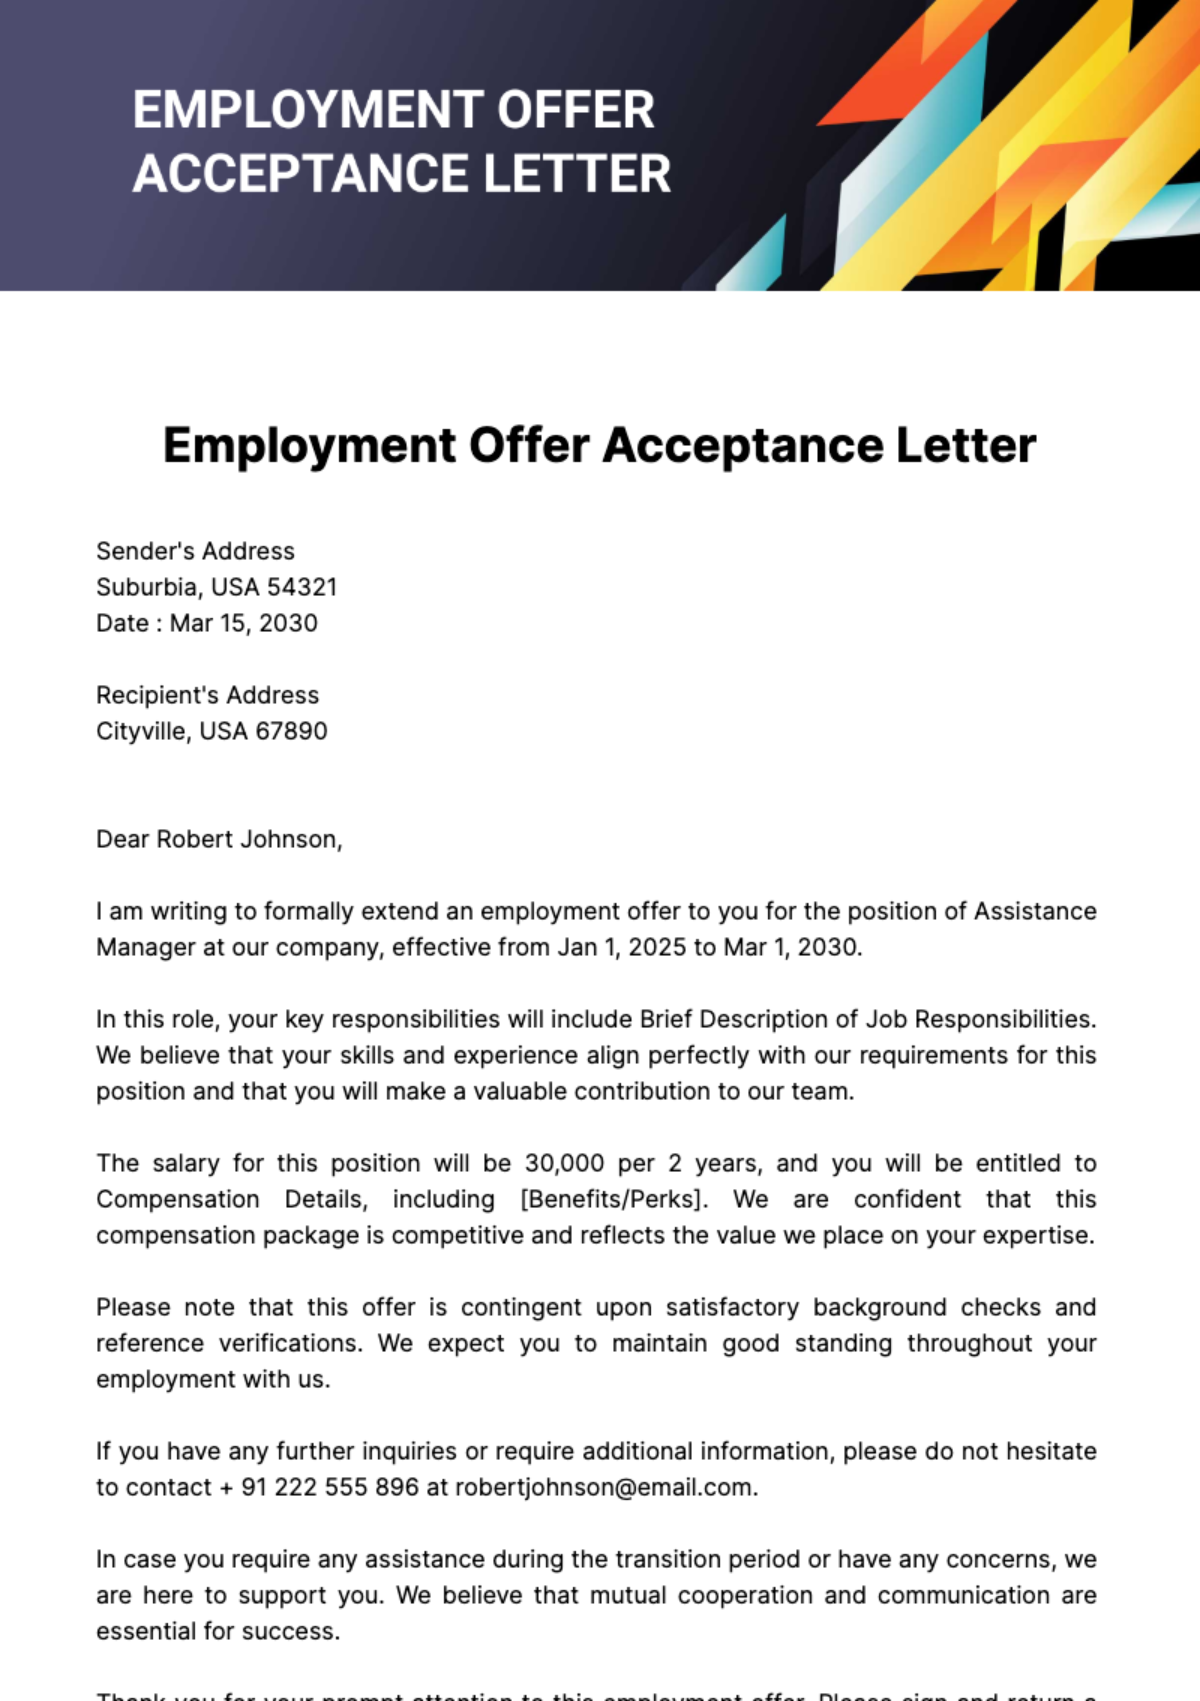 Employment Offer Acceptance Letter Template